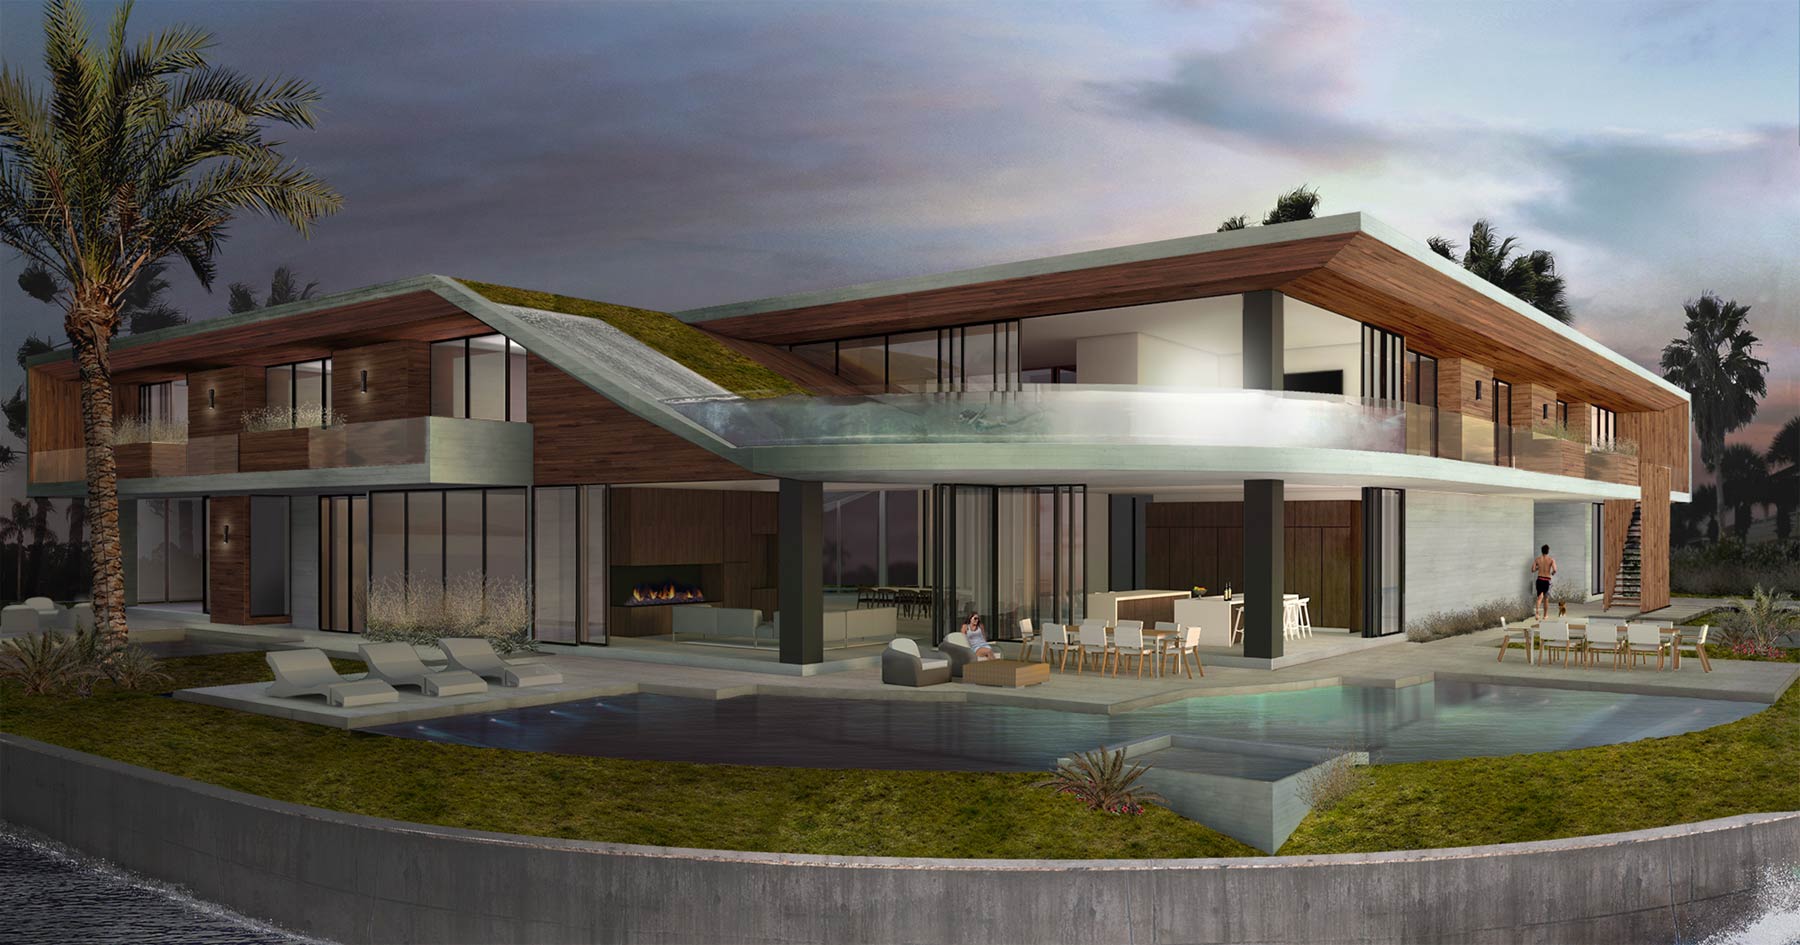 Florida Modern Architecture Rendering of Custom Concrete Home and Floating Pool